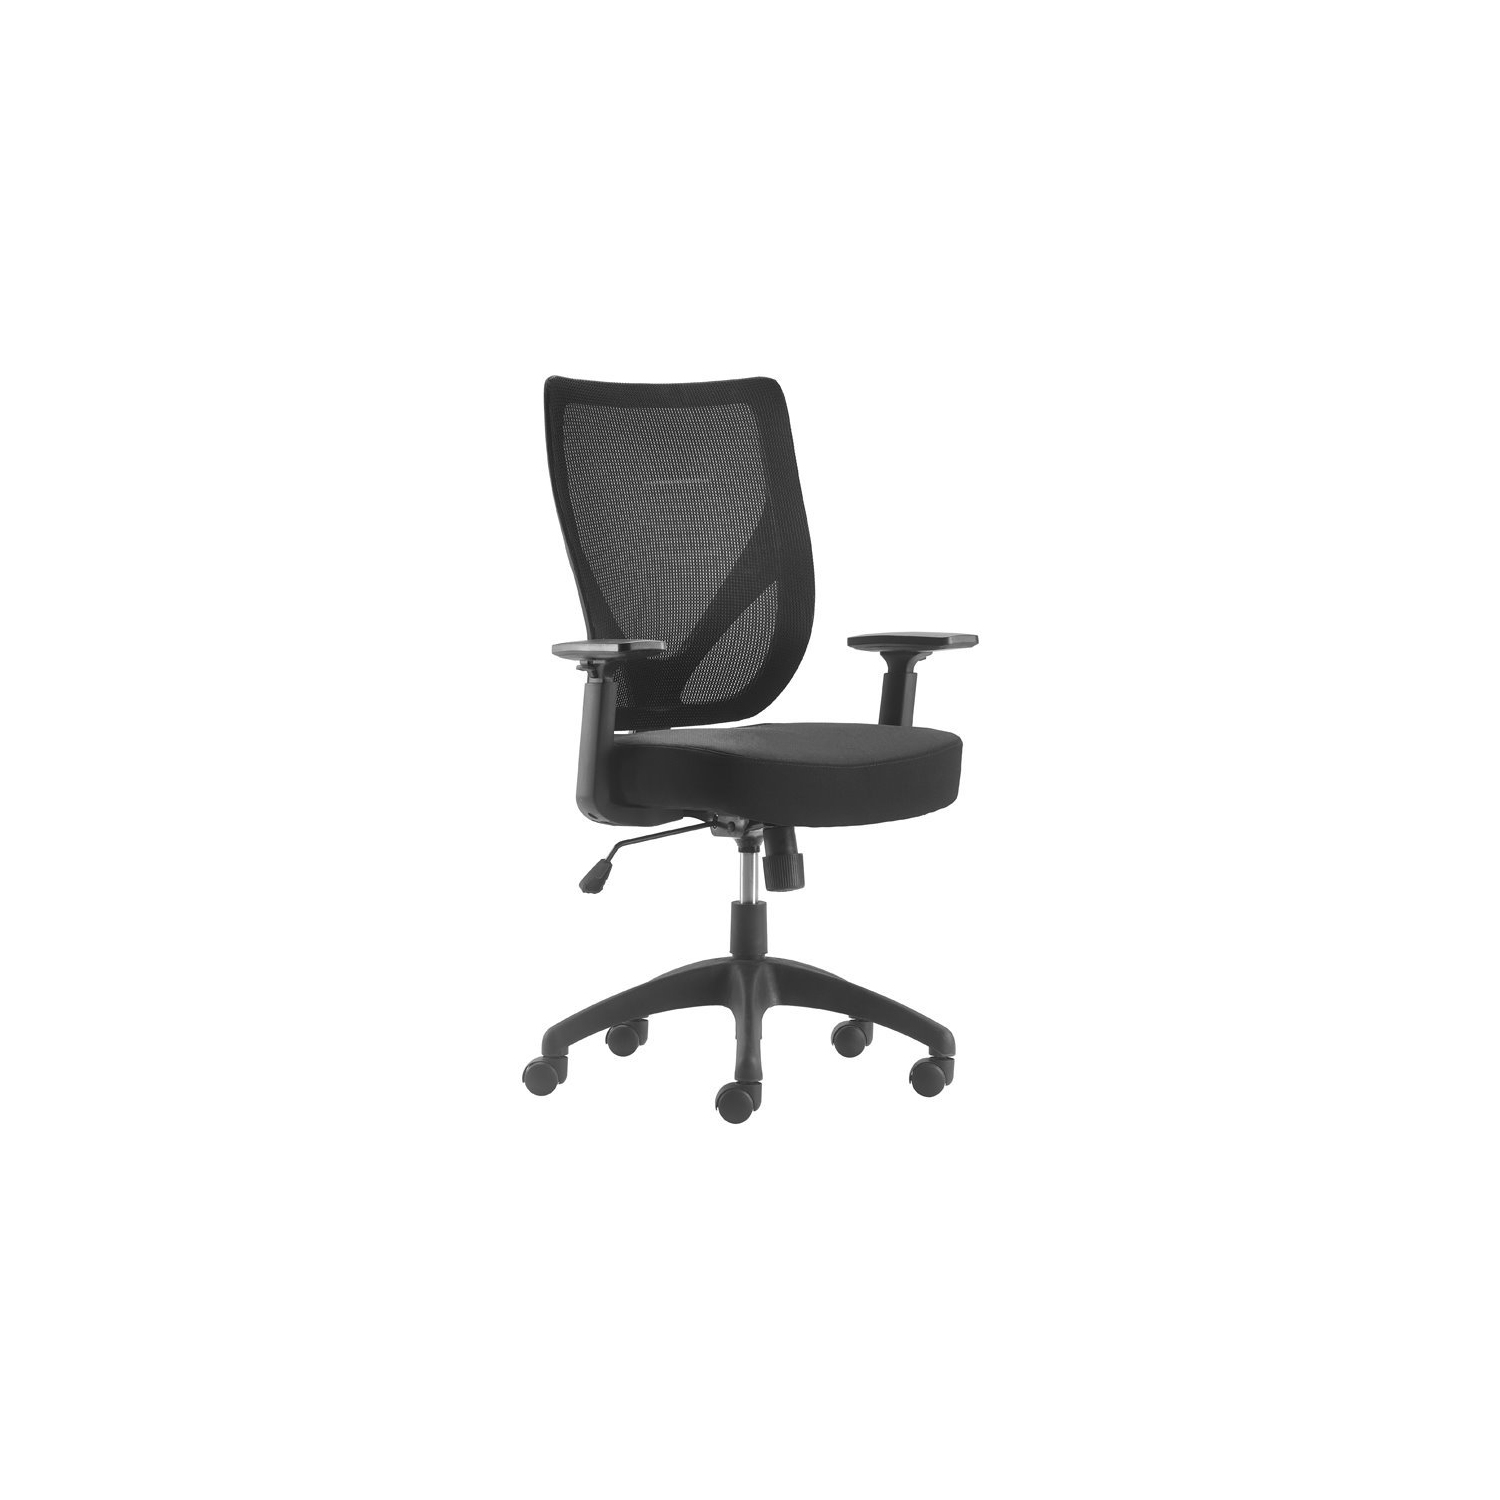 Serta Works Production Jet Black Mesh Office Chair with Nylon Base